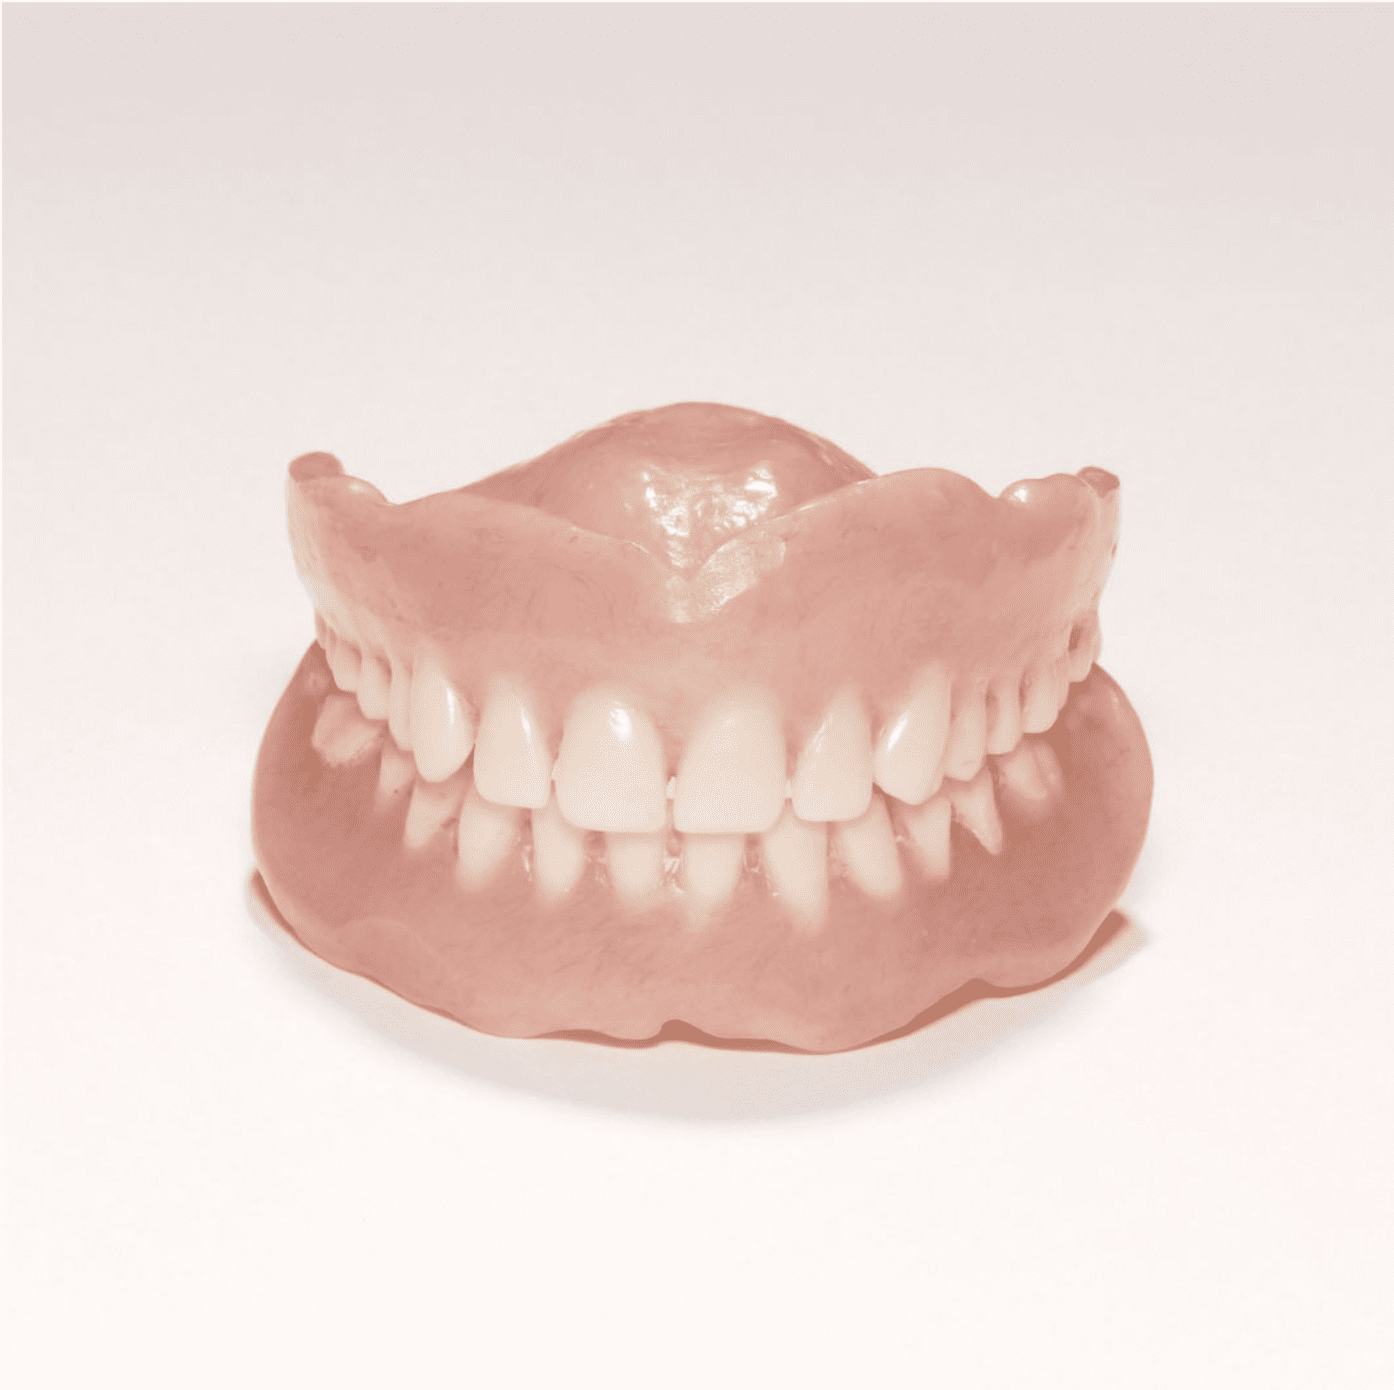 a set of dentures on a white surface